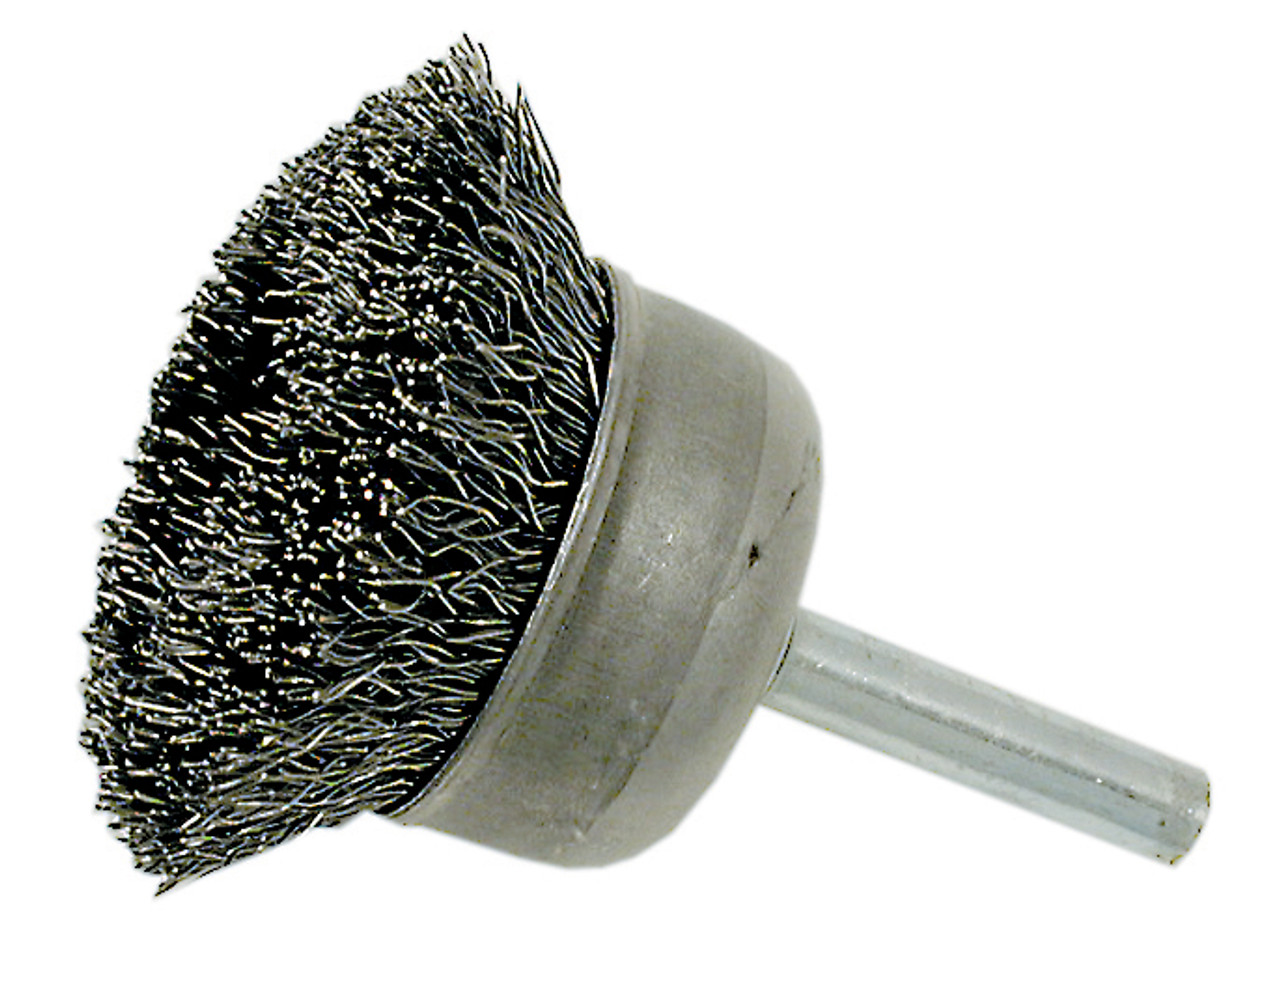 2-1/2 x 1/4" Shaft Mounted Crimped Cup Brush 553722